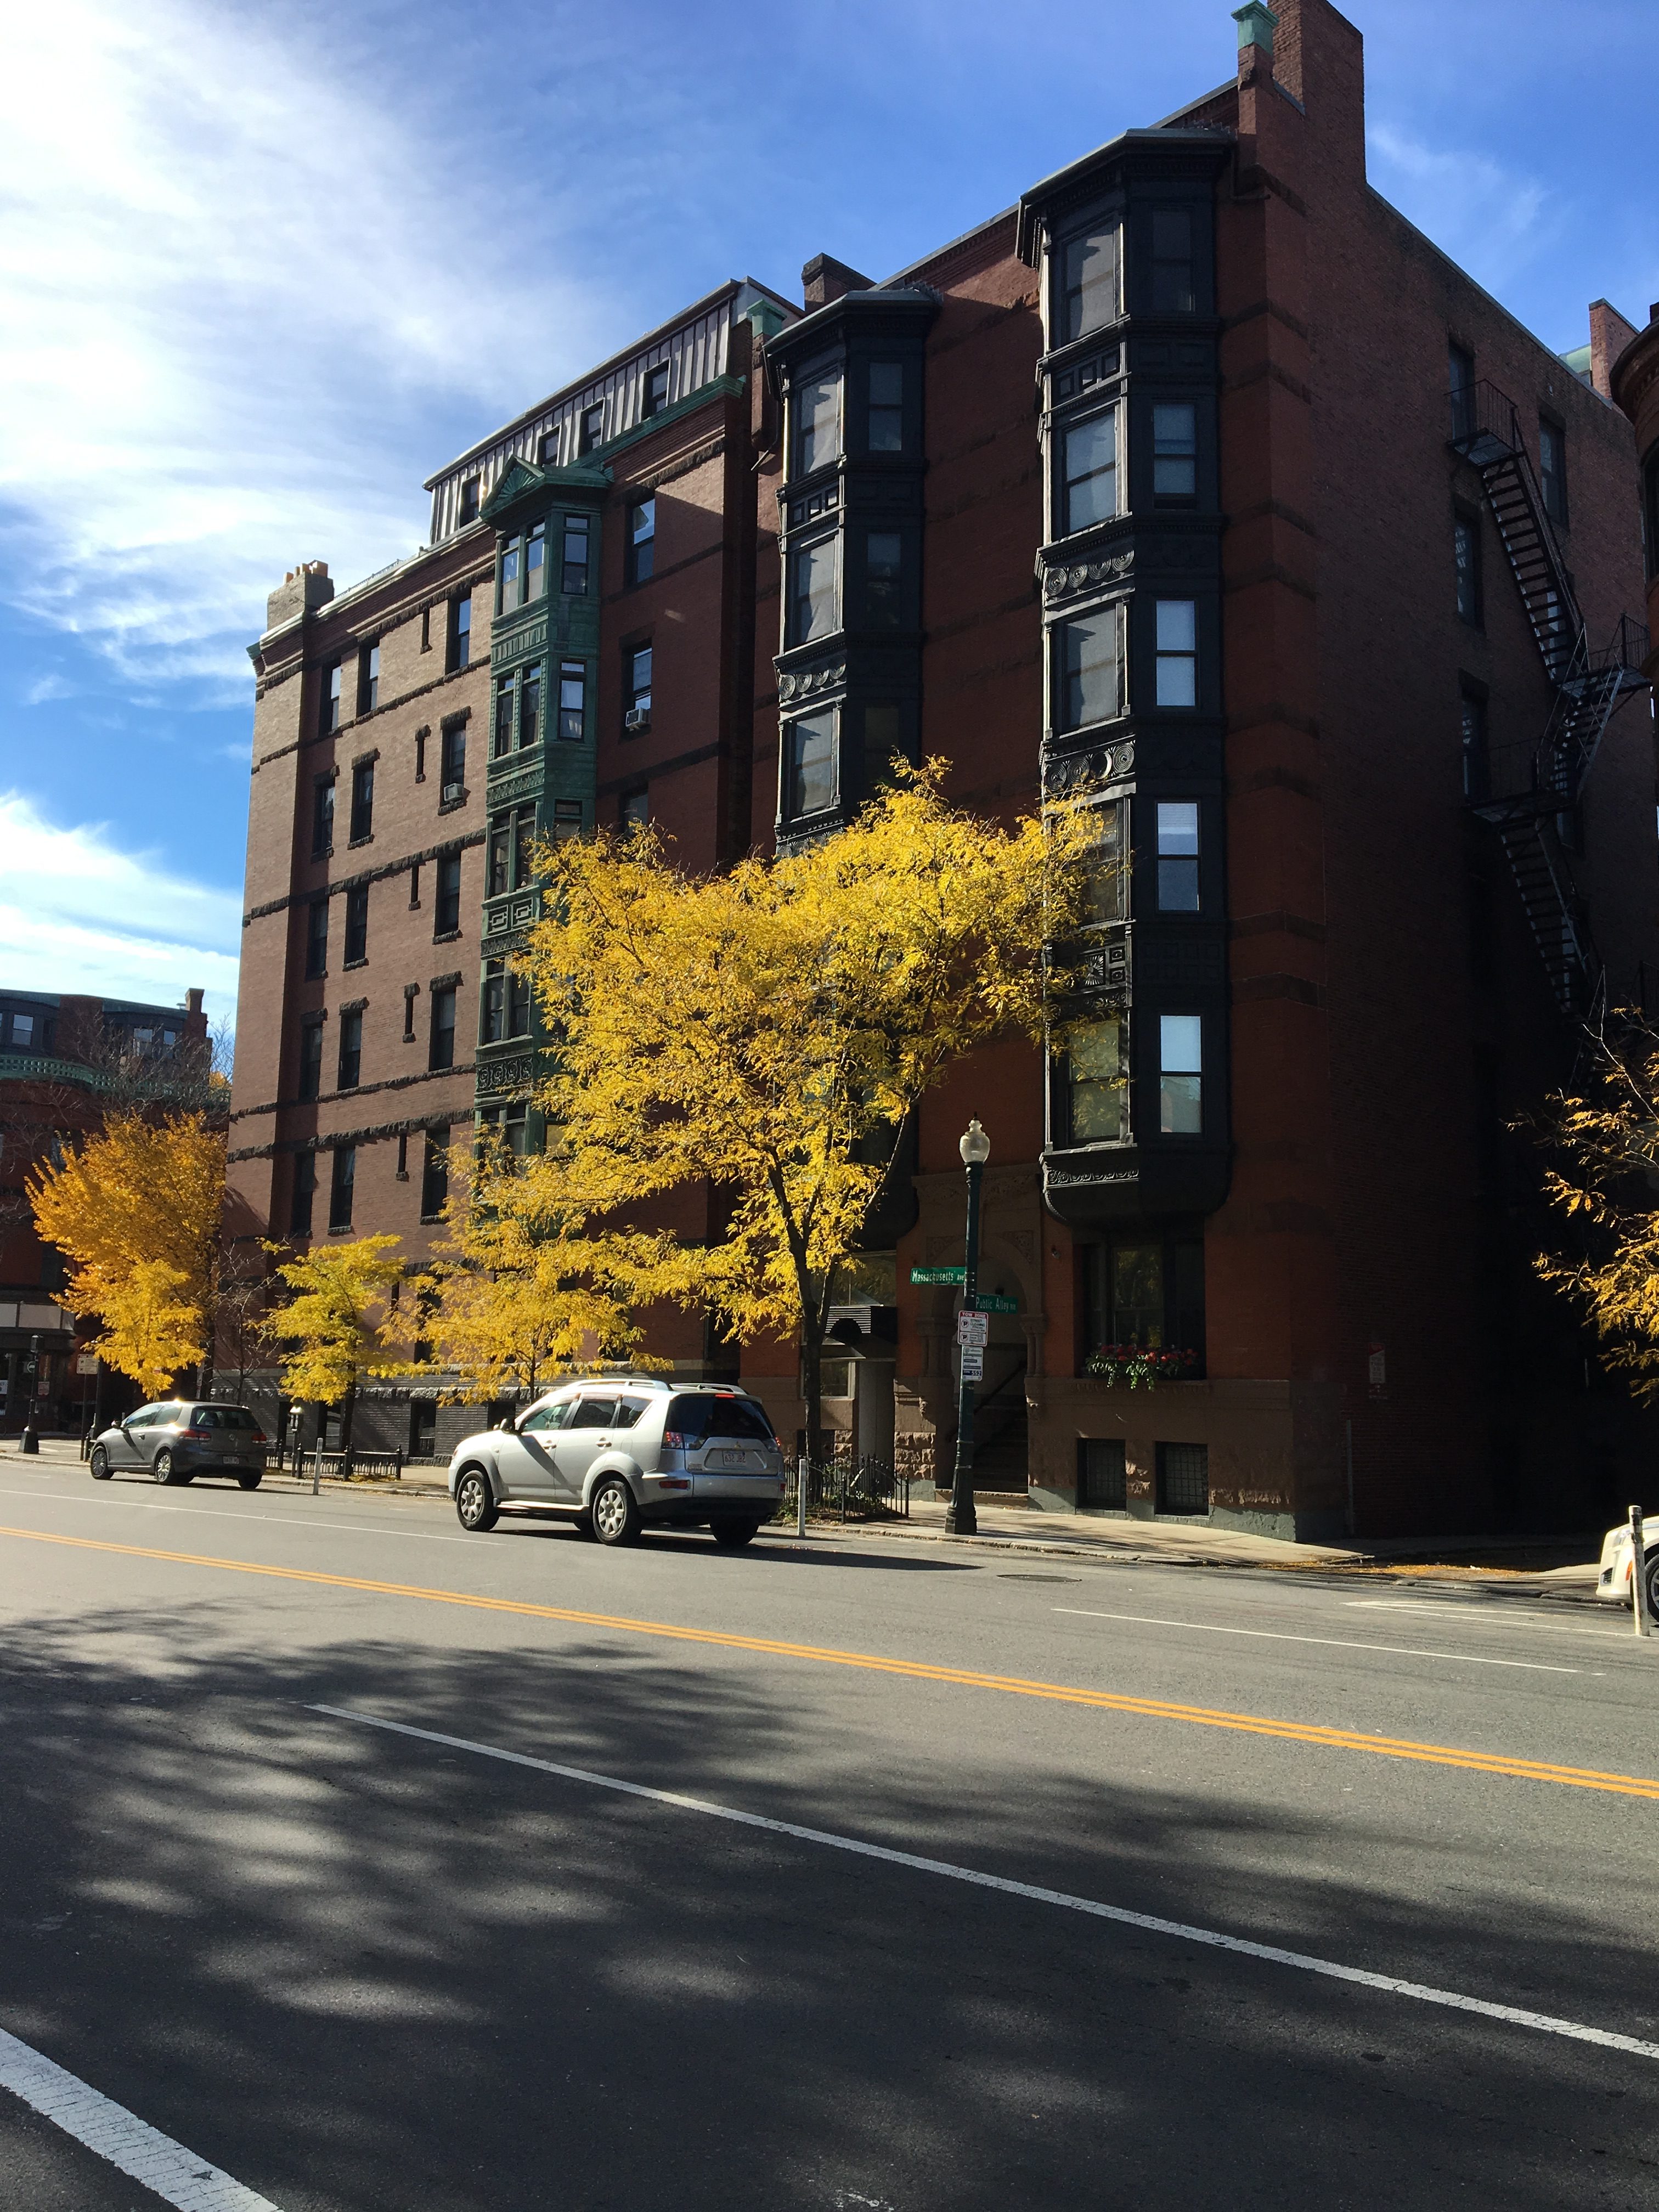 A red brick building in Boston with stacked bay windows. In front of it is one shortish yellow tree.